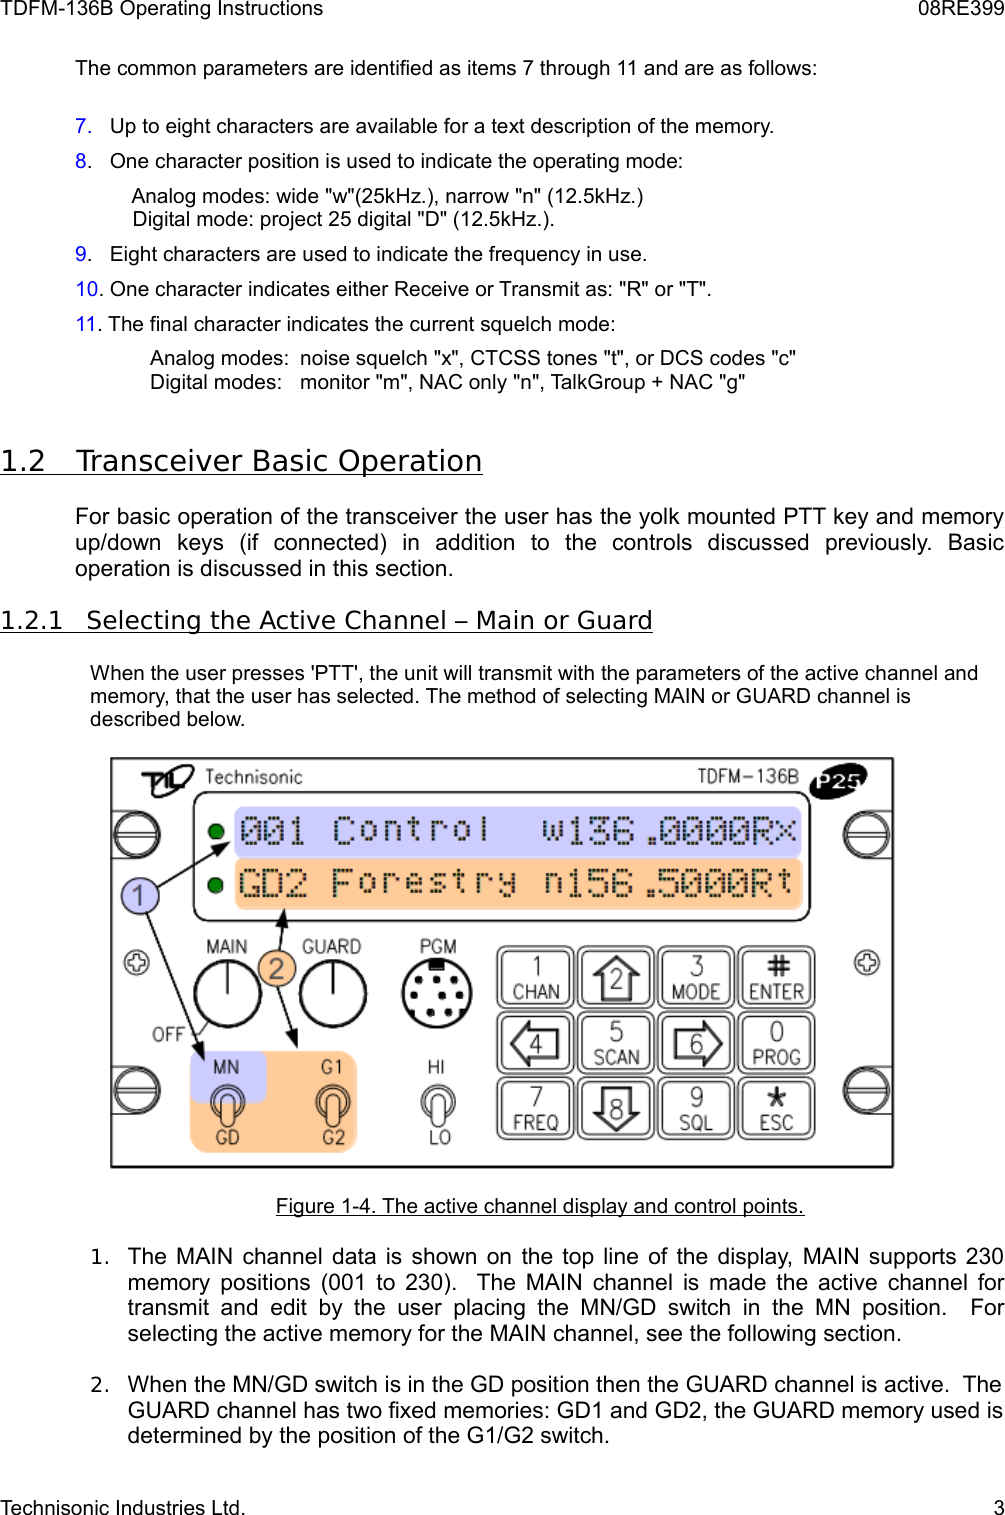 TDFM-136B Operating Instructions 08RE399The common parameters are identified as items 7 through 11 and are as follows:7.   Up to eight characters are available for a text description of the memory.8.   One character position is used to indicate the operating mode:          Analog modes: wide &quot;w&quot;(25kHz.), narrow &quot;n&quot; (12.5kHz.)          Digital mode: project 25 digital &quot;D&quot; (12.5kHz.).9.   Eight characters are used to indicate the frequency in use.10. One character indicates either Receive or Transmit as: &quot;R&quot; or &quot;T&quot;.11. The final character indicates the current squelch mode:       Analog modes:  noise squelch &quot;x&quot;, CTCSS tones &quot;t&quot;, or DCS codes &quot;c&quot;       Digital modes:  monitor &quot;m&quot;, NAC only &quot;n&quot;, TalkGroup + NAC &quot;g&quot;1.2         Transceiver Basic Operation   For basic operation of the transceiver the user has the yolk mounted PTT key and memory up/down   keys   (if   connected)   in   addition   to   the   controls   discussed   previously.   Basic operation is discussed in this section.1.2.1         Selecting the Active Channel – Main or Guard   When the user presses &apos;PTT&apos;, the unit will transmit with the parameters of the active channel and memory, that the user has selected. The method of selecting MAIN or GUARD channel is described below.Figure 1-4. The active channel display and control points.1. The MAIN channel data is shown on the top line of the display, MAIN supports 230 memory positions  (001 to 230).   The MAIN channel is made the active channel for transmit and edit  by the user  placing the  MN/GD switch in the  MN position.    For selecting the active memory for the MAIN channel, see the following section.2. When the MN/GD switch is in the GD position then the GUARD channel is active.  The GUARD channel has two fixed memories: GD1 and GD2, the GUARD memory used is determined by the position of the G1/G2 switch.Technisonic Industries Ltd. 3